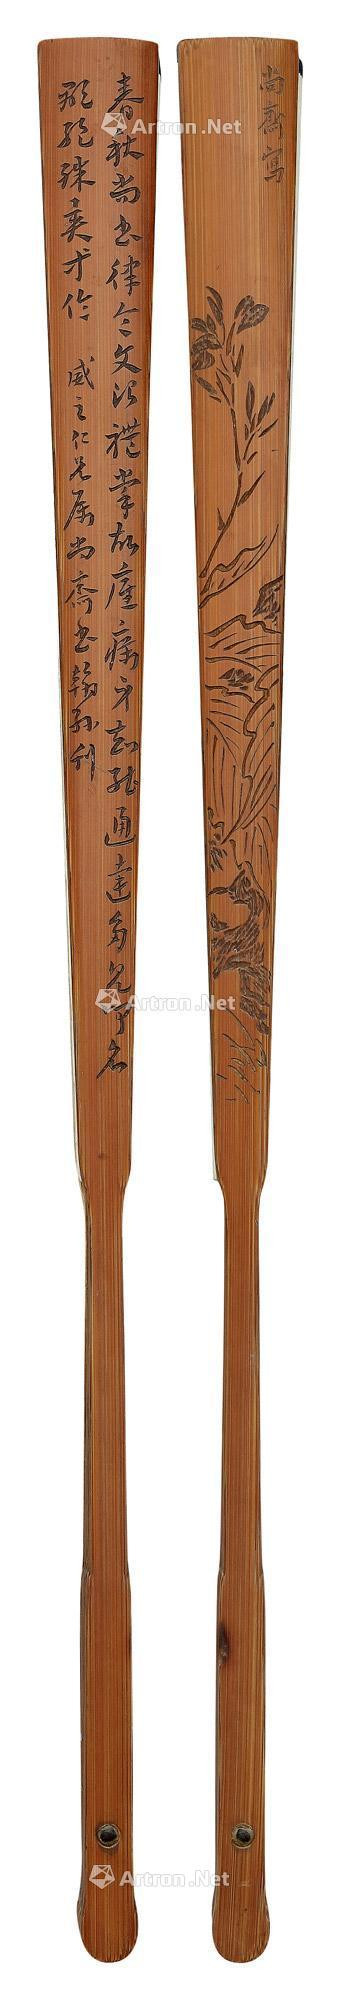 A BAMBOO CARVED‘FLOWER AND ROCK AND CALLIGRAPHY IN RUNNING SCRIPT’FAN RIB BY ZHANG WENGUI